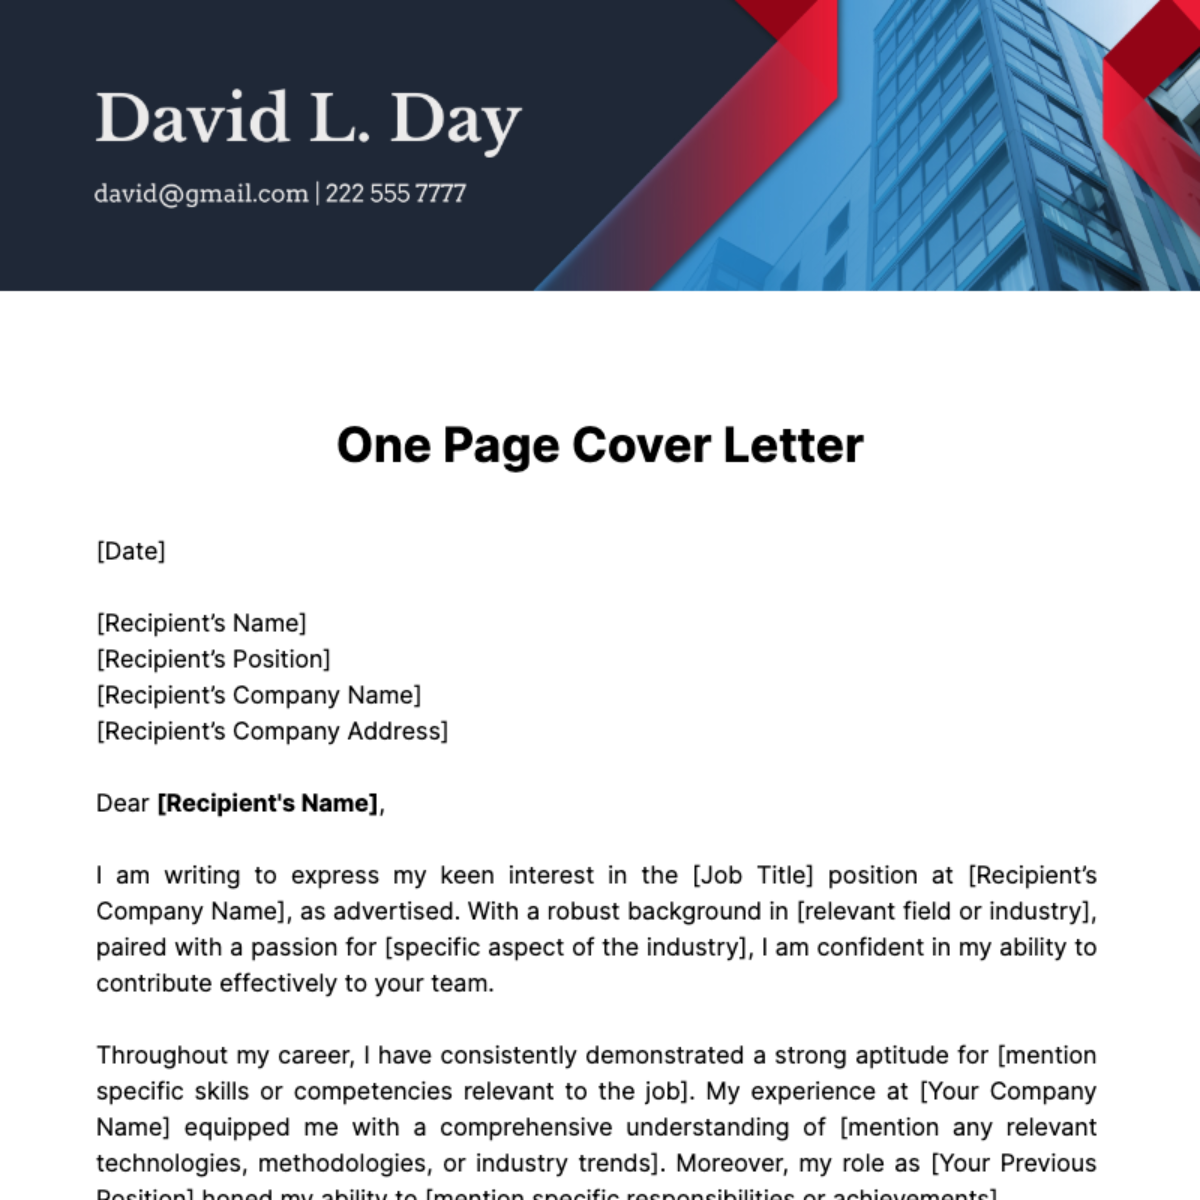 One Page Cover Letter Template